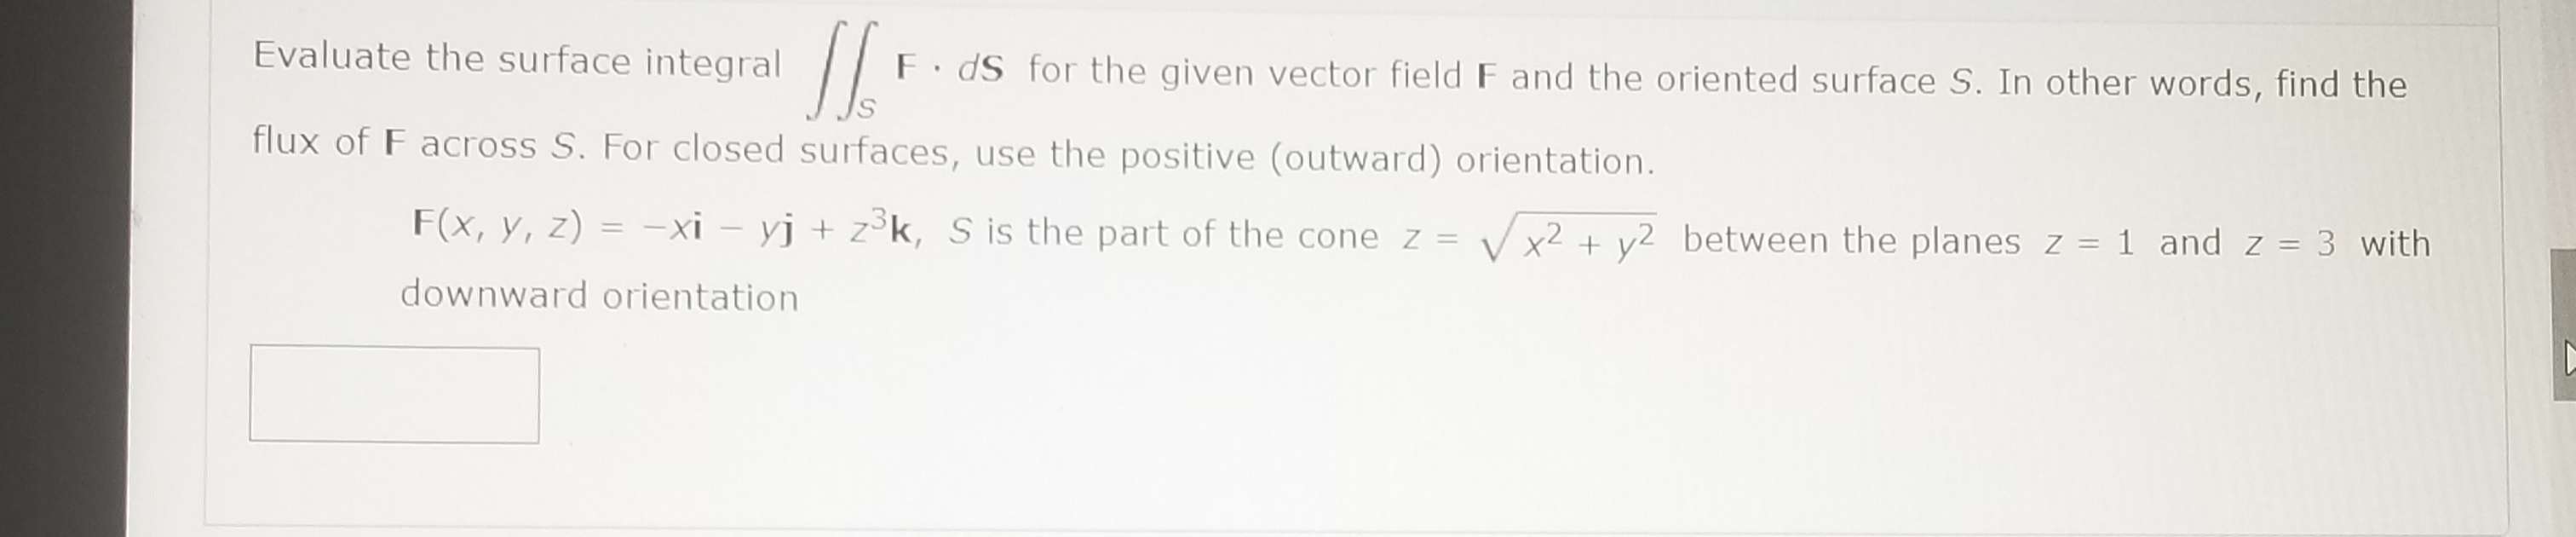 Evaluate the surface integral
F. dS for the given vector field F and the oriented surface S. In other words, find the
flux of F across S. For closed surfaces, use the positive (outward) orientation.
F(x, y, z) = -xi – yj + z°k, S is the part of the cone z
= V
x²+ y2 between the planes z = 1 and z = 3 with
downward orientation
